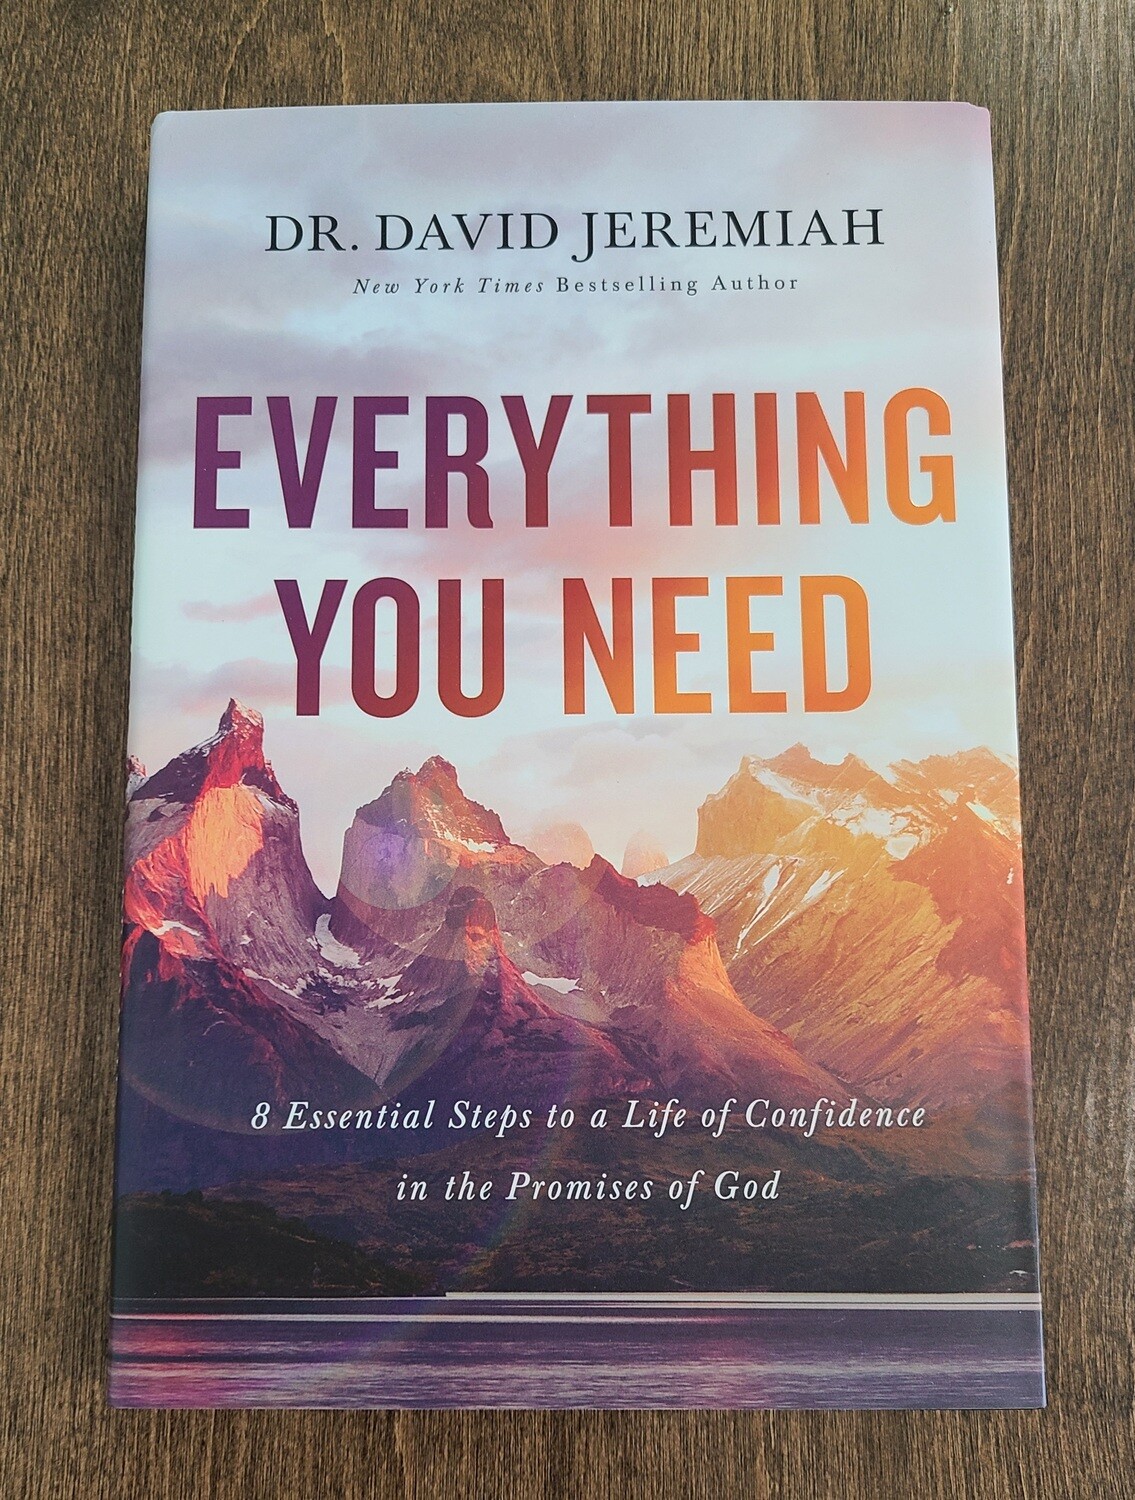 Everything you Need by Dr. David Jeremiah